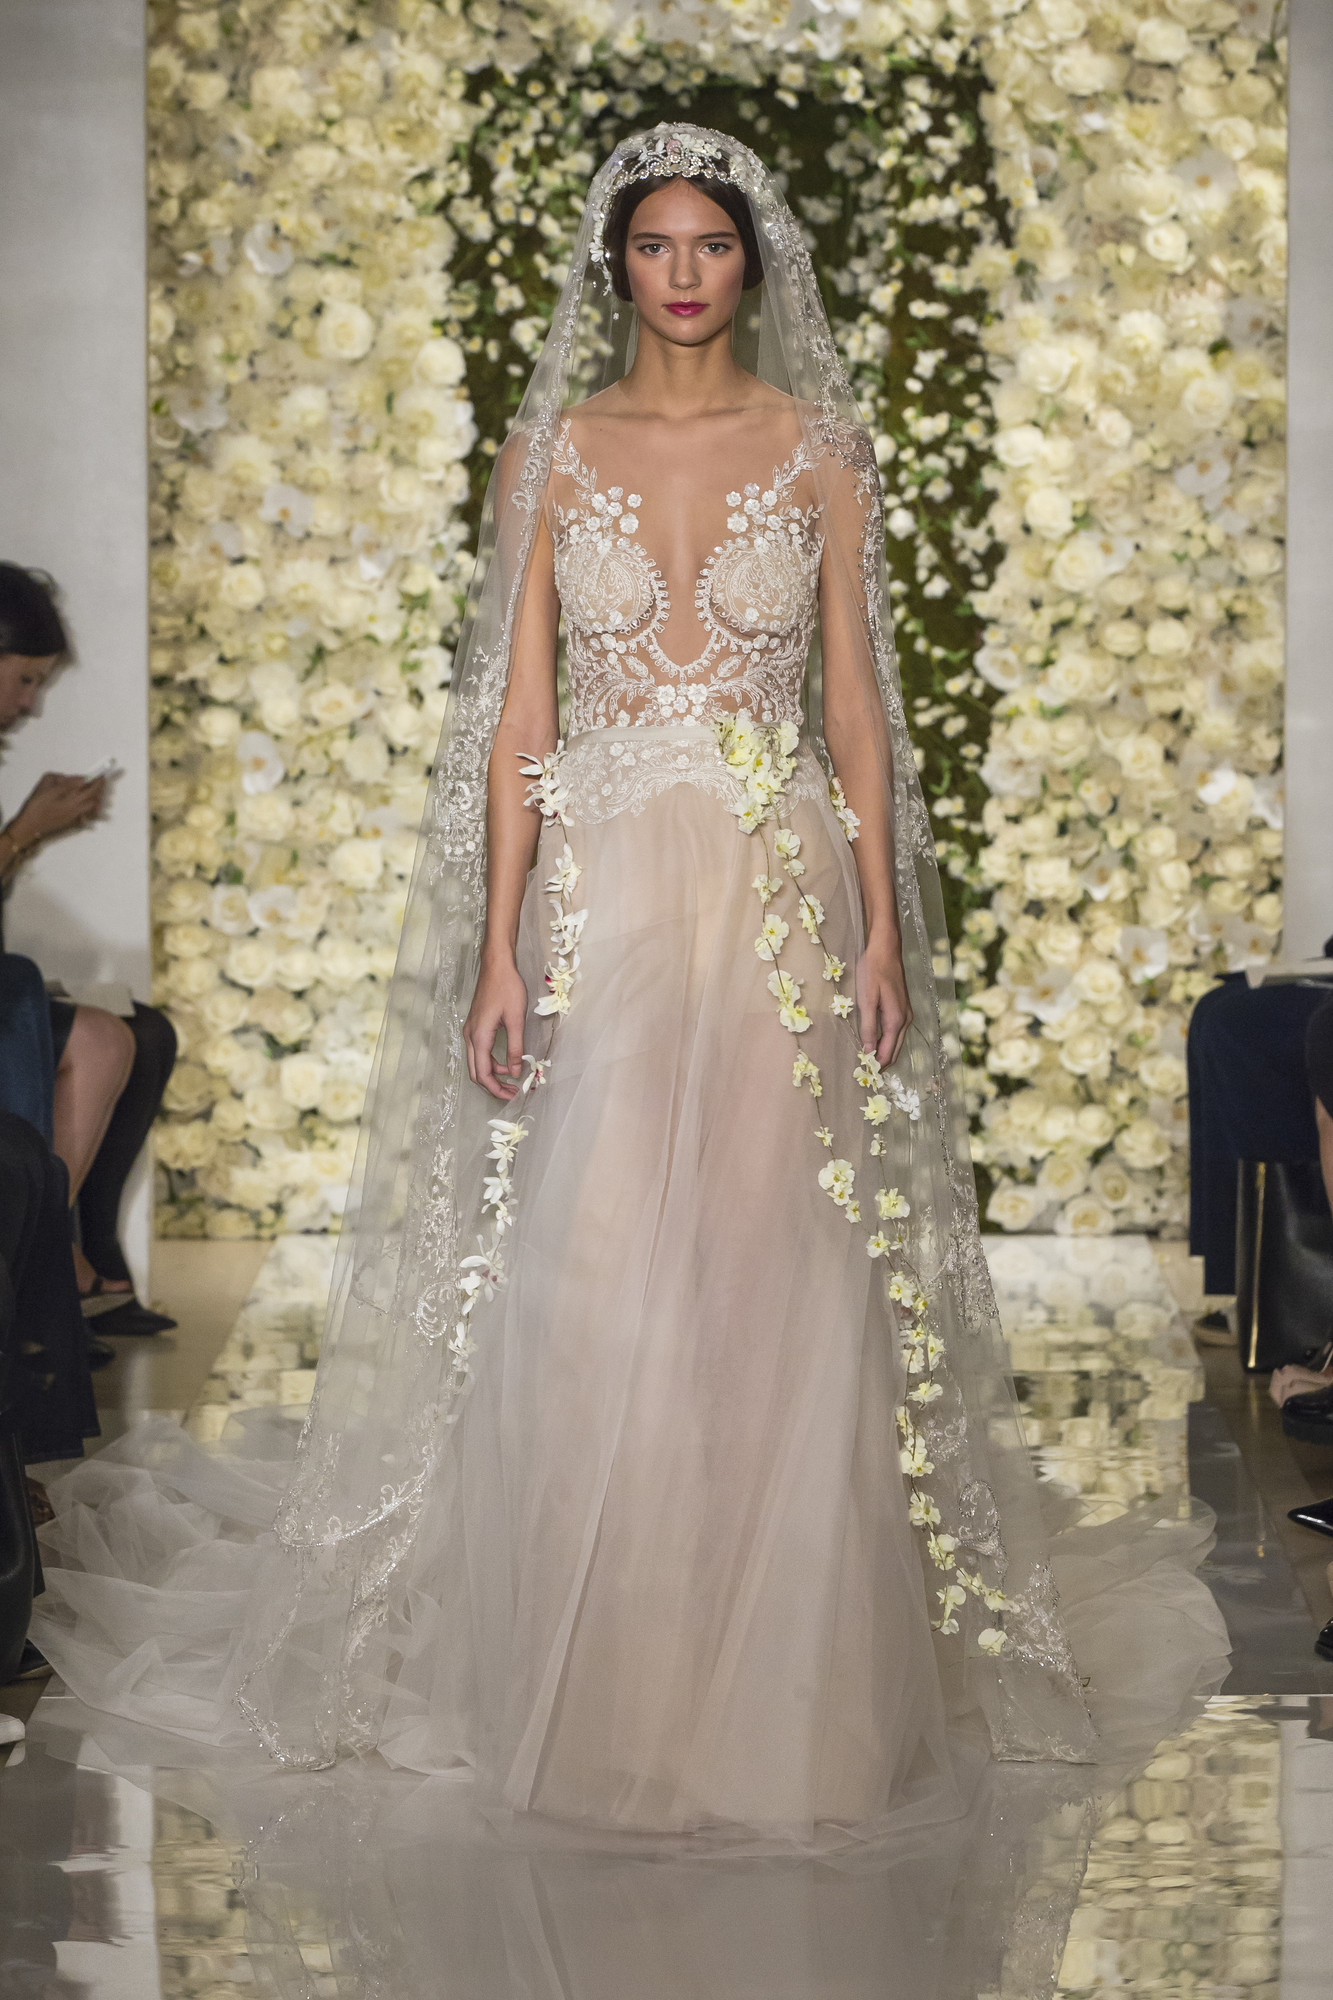 Wedding Dresses by Reem Acra - Couture 